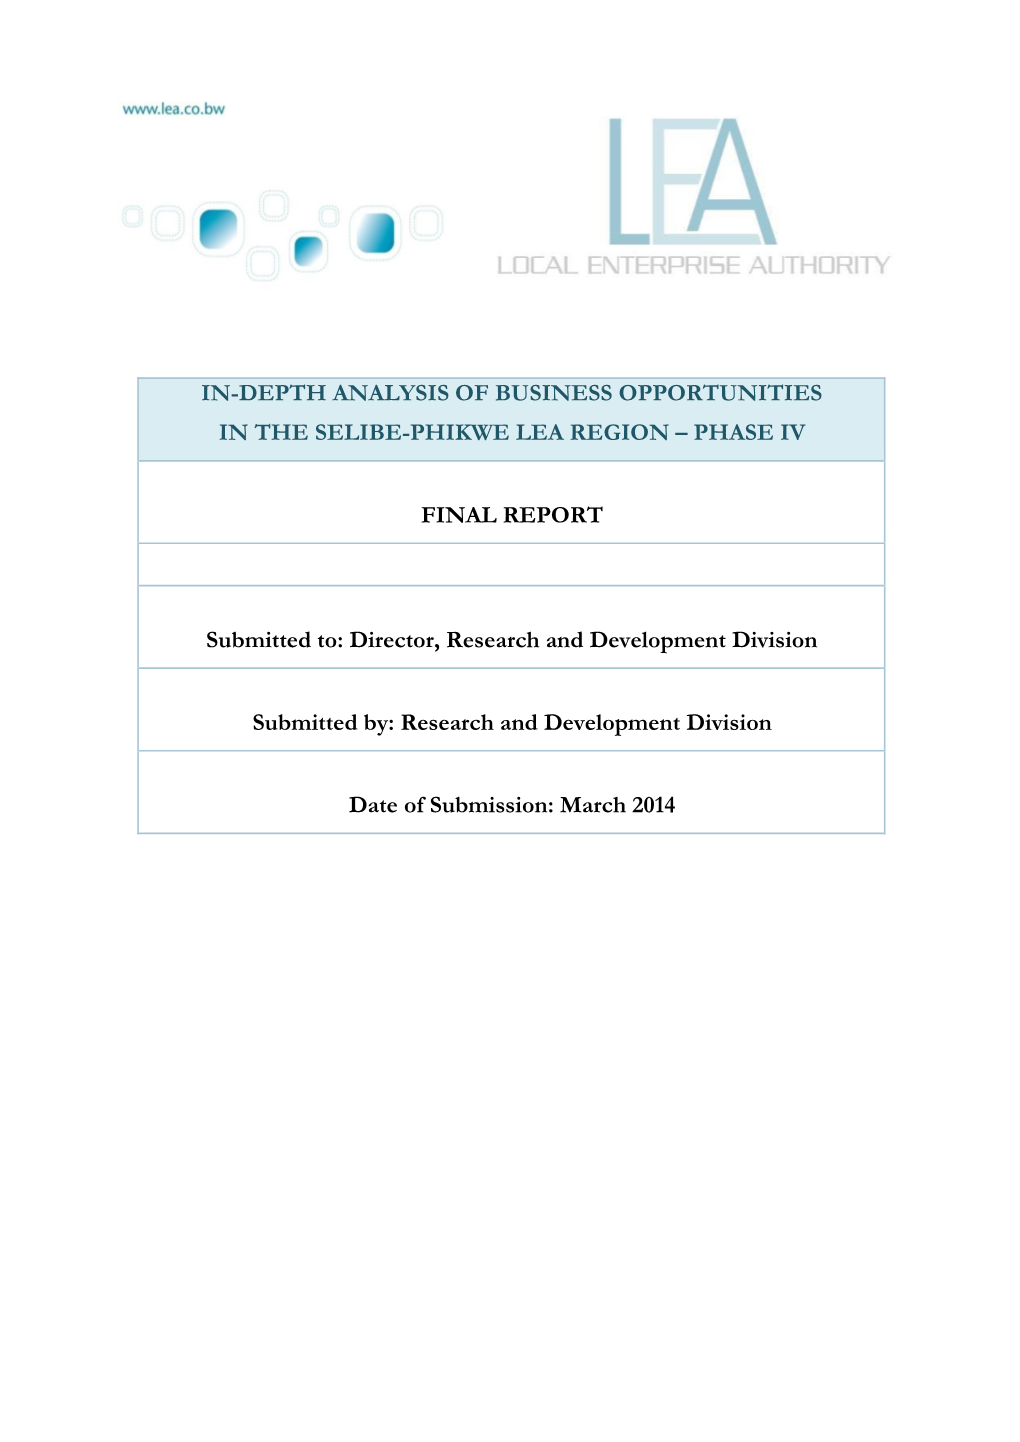 In-Depth Analysis of Business Opportunities in the Selibe-Phikwe Lea Region – Phase Iv